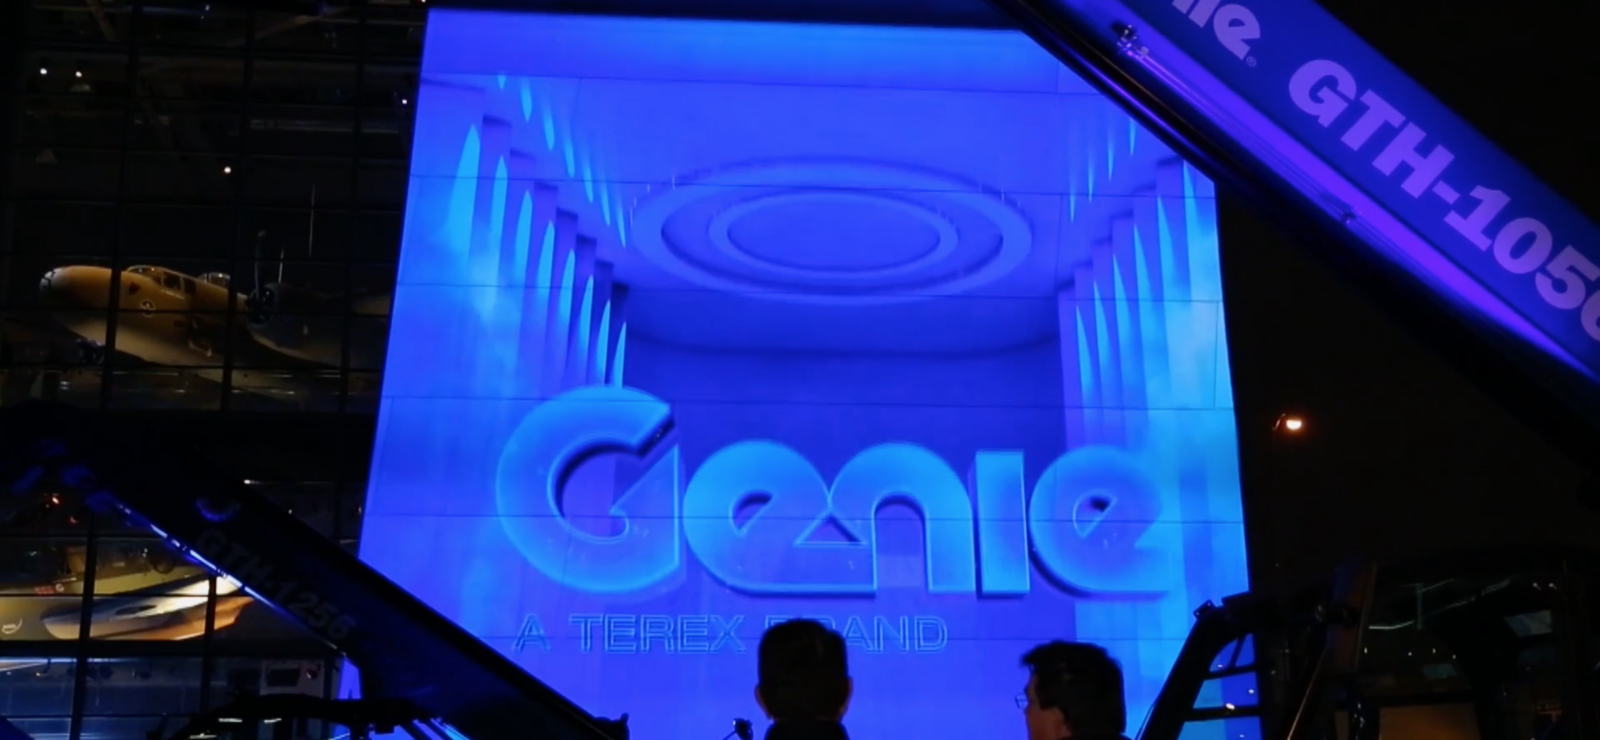 How Projection Mapping can be Leveraged in Brand Activations